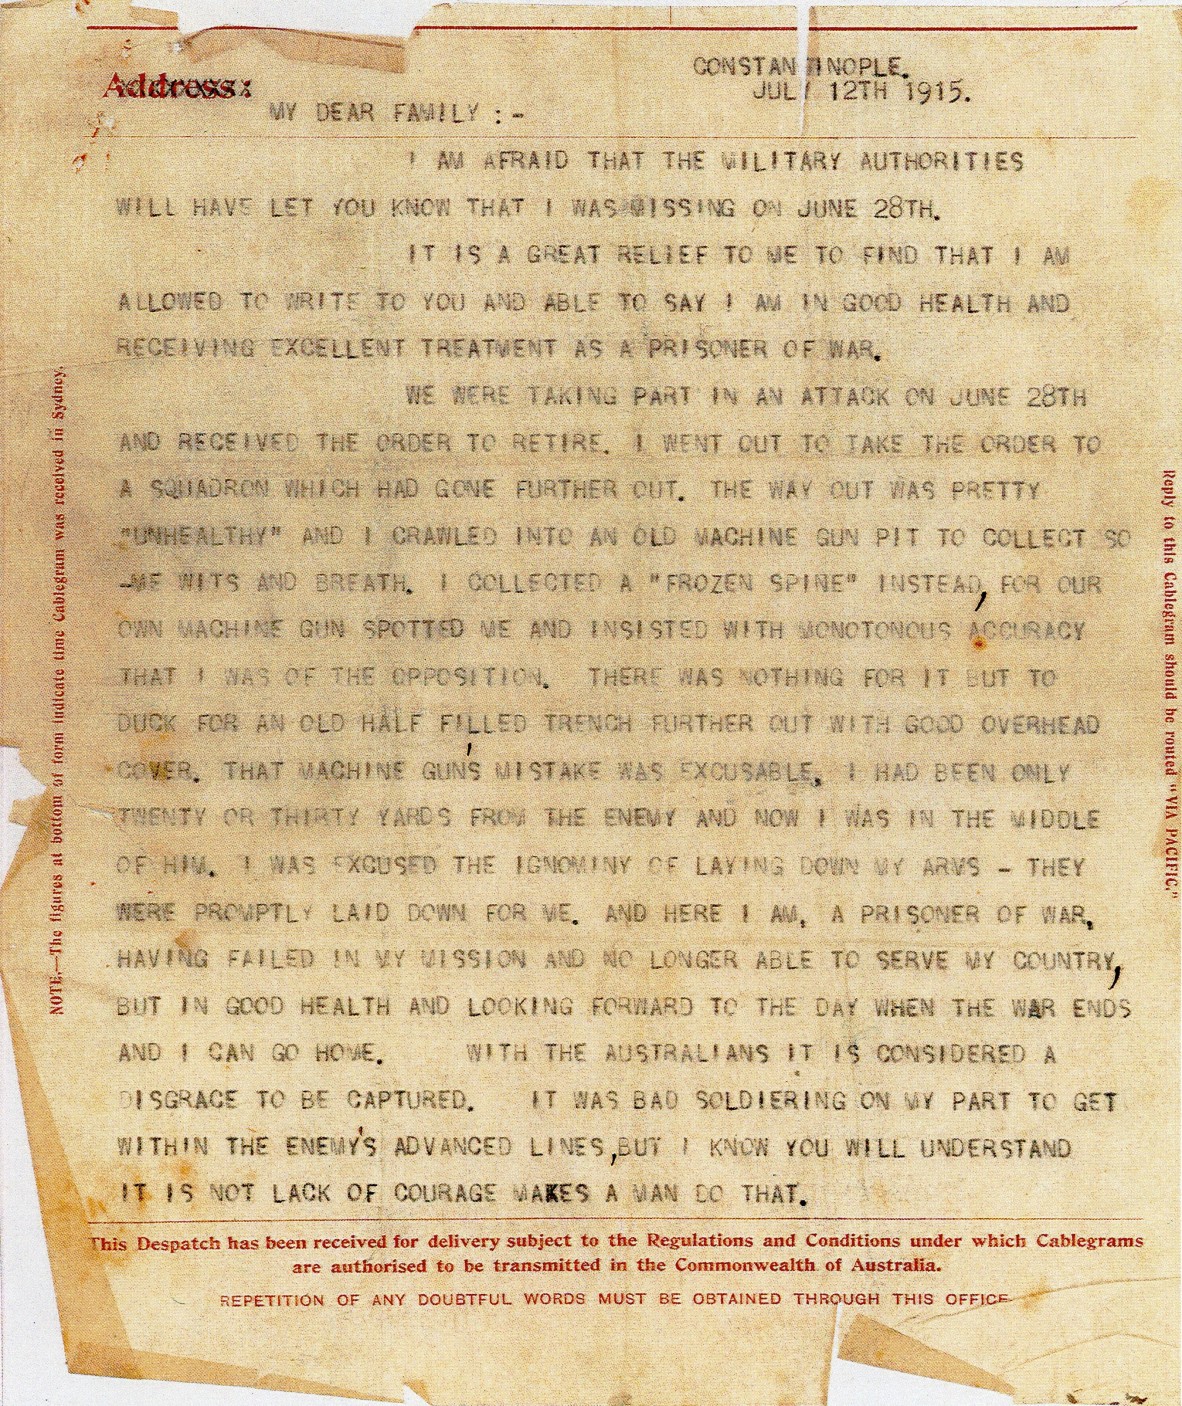 Letter dated 12 July 1915 from Maurice Delpratt to his family from Constantinople confirming that he was now a prisoner of war John Oxley Library State Library of Queensland Acc 281157